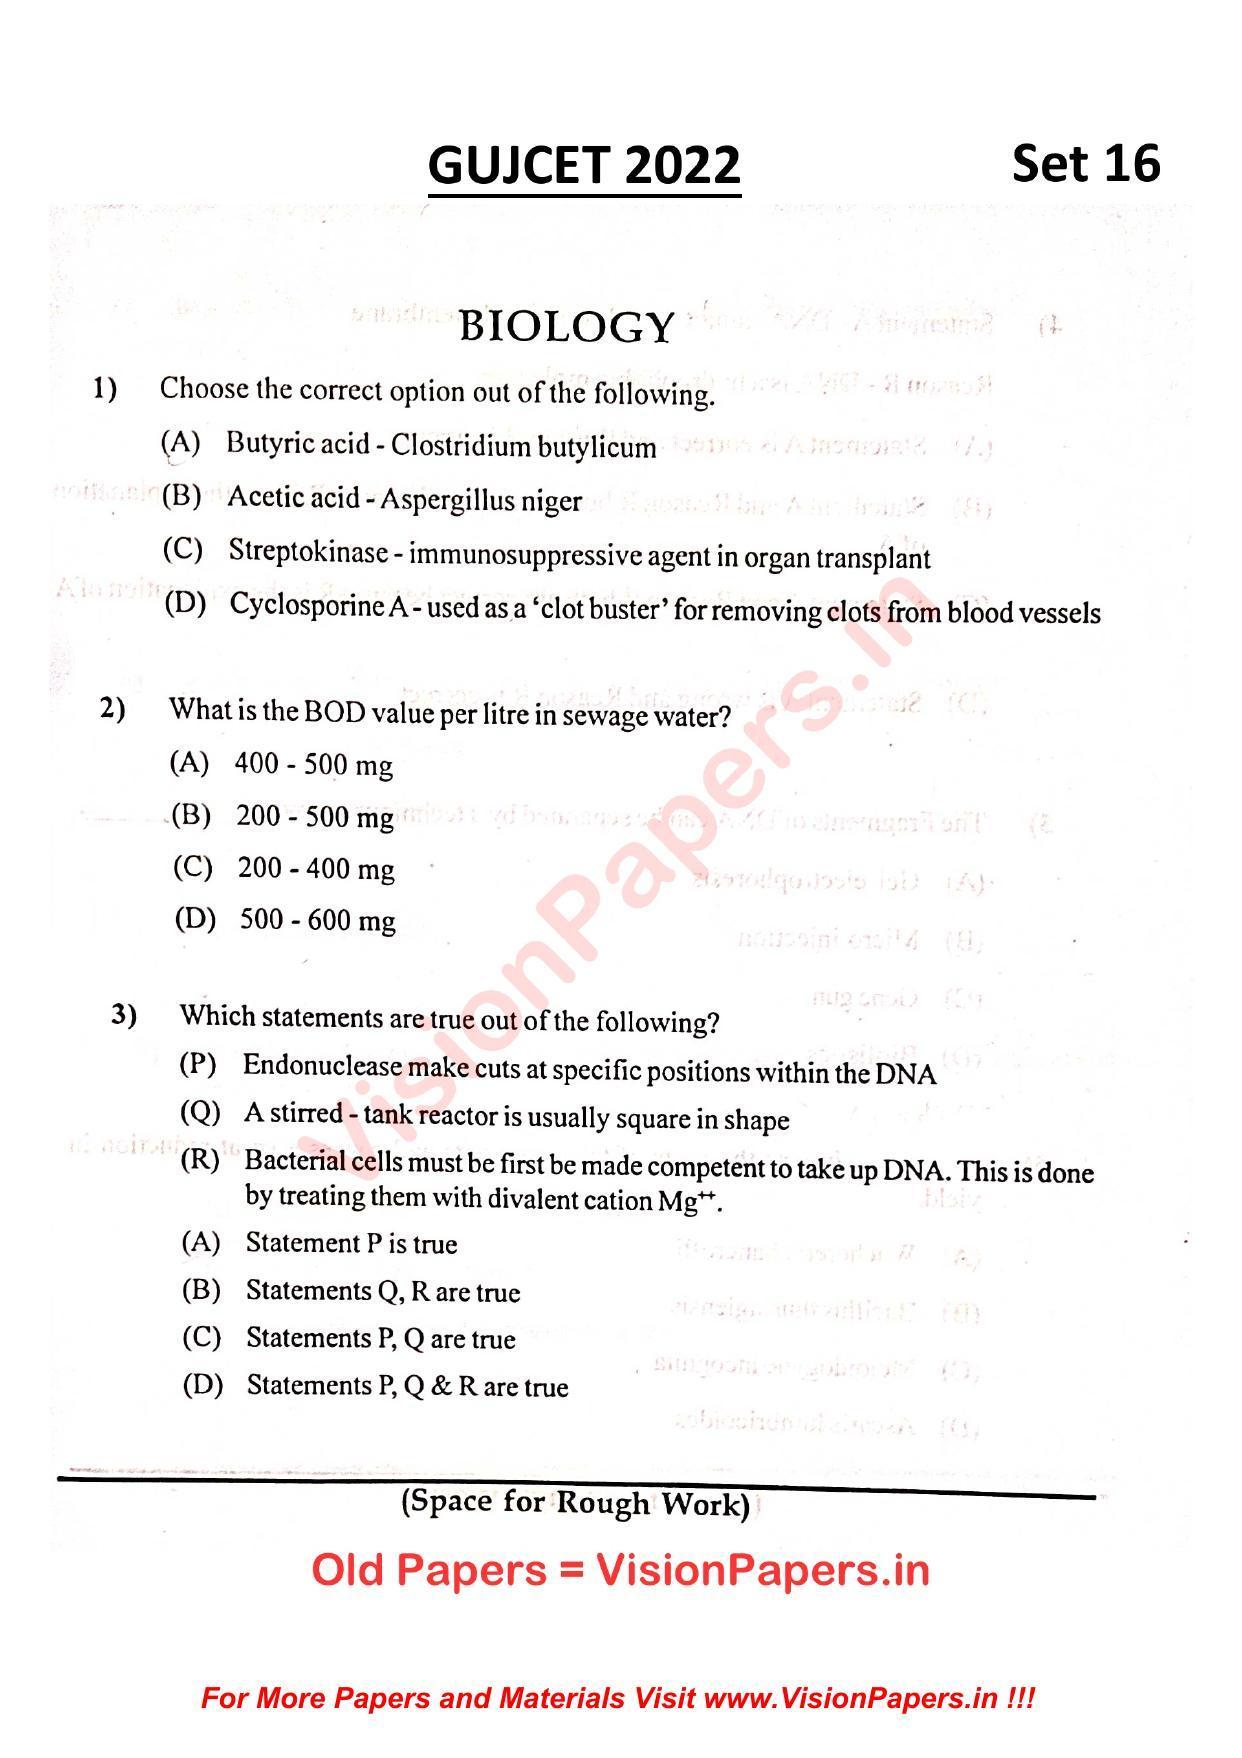 GUJCET Biology 2022 Question Paper - Page 1